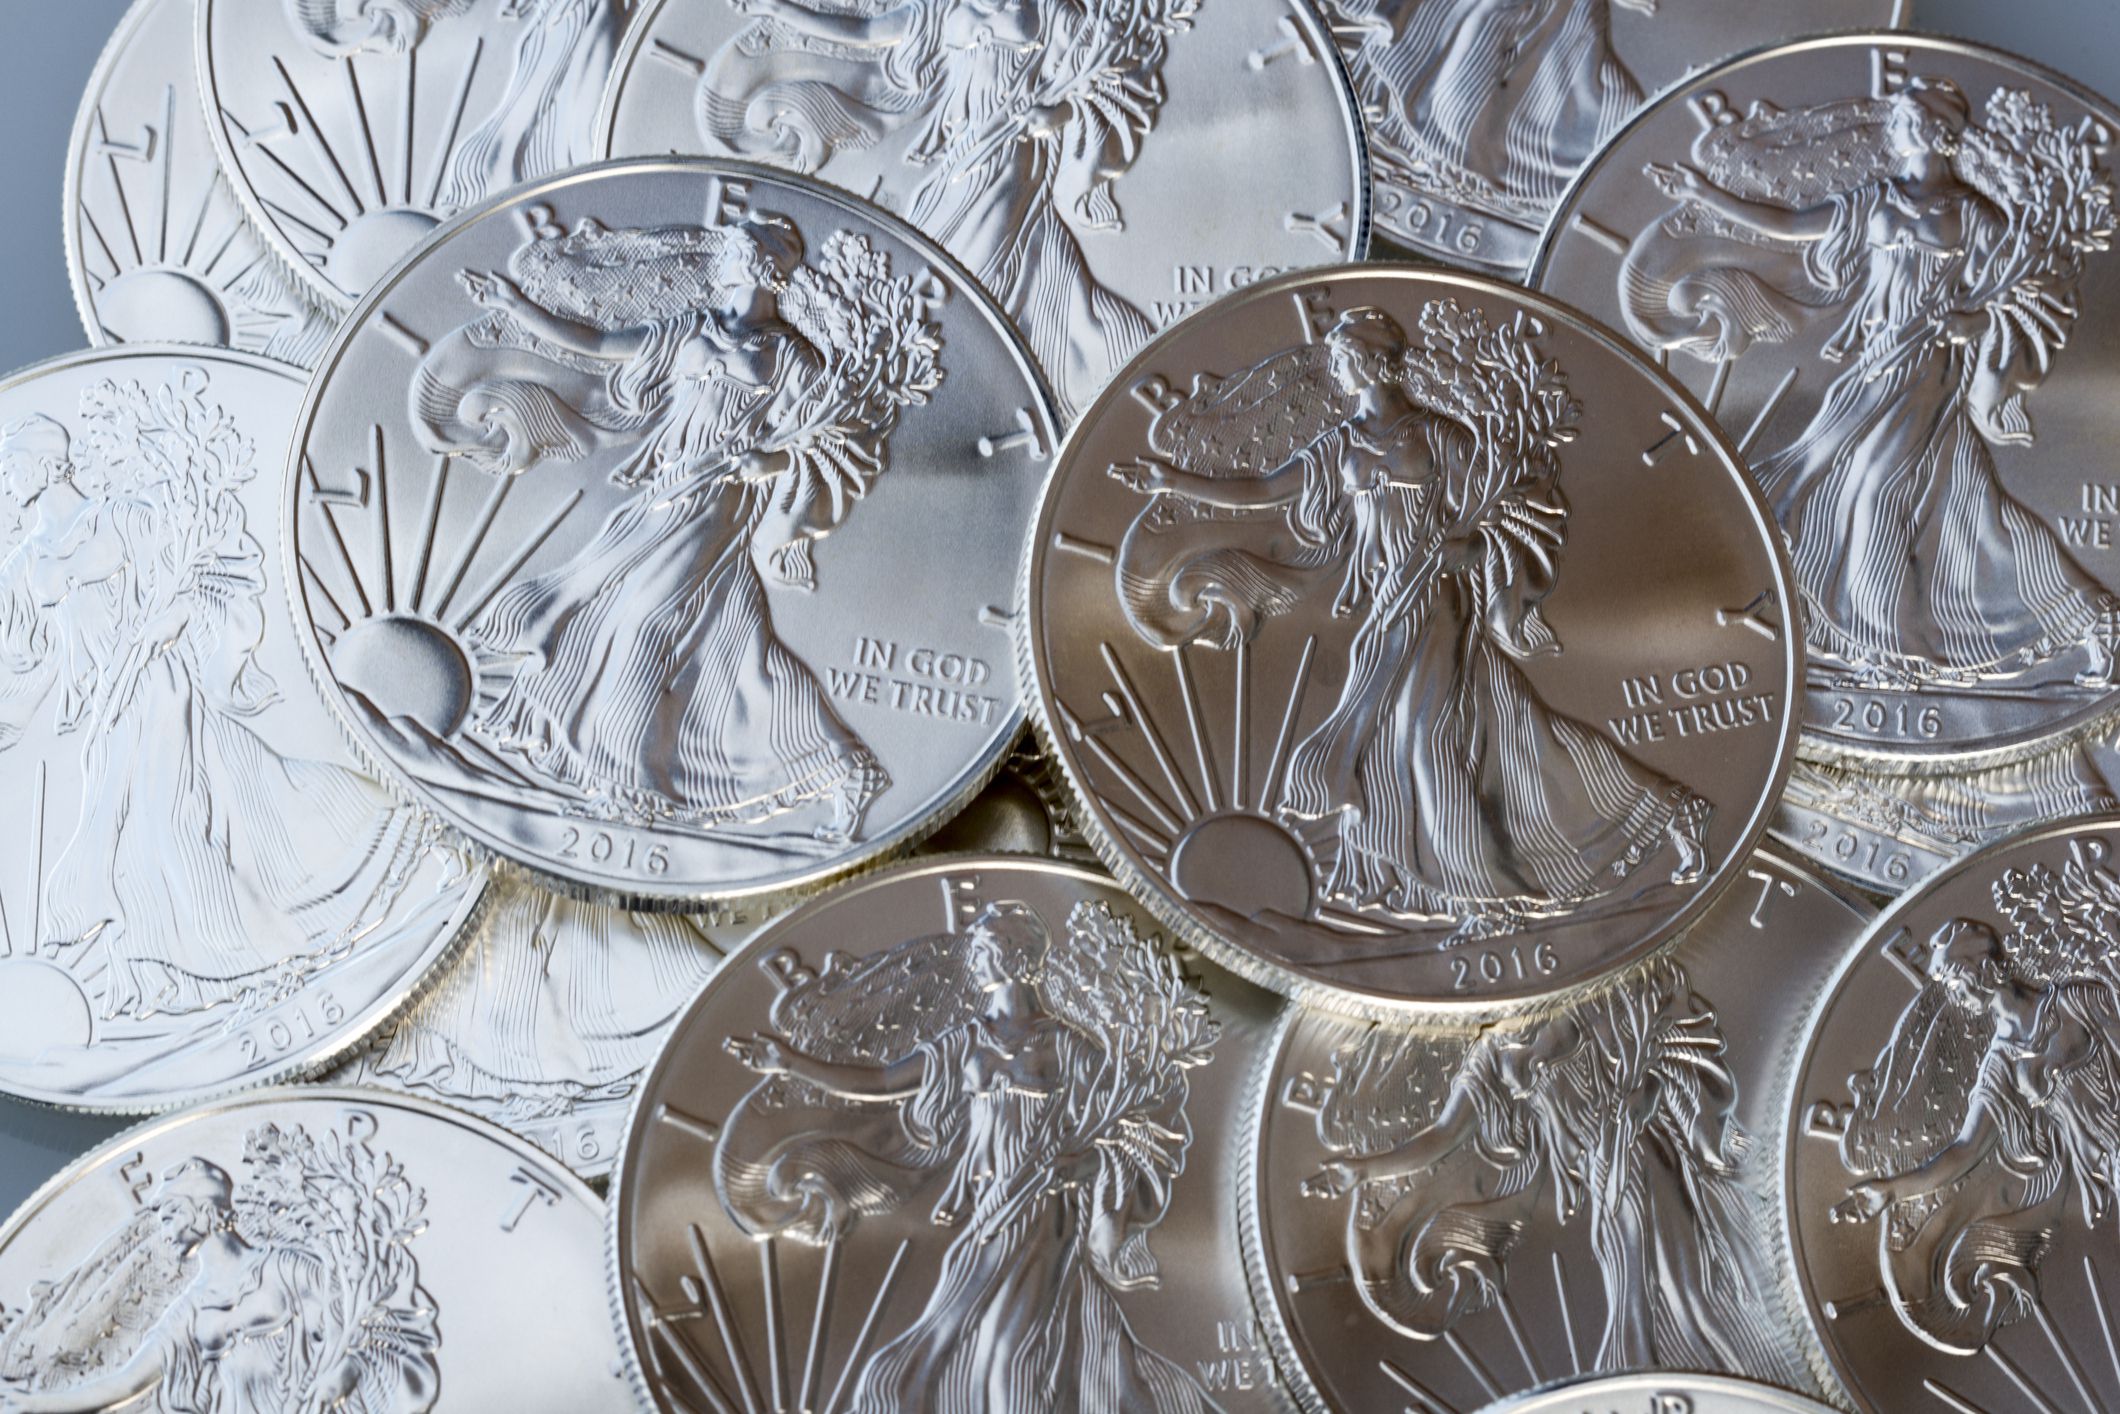 How to Spot Fake Silver Eagle Coin Fraud